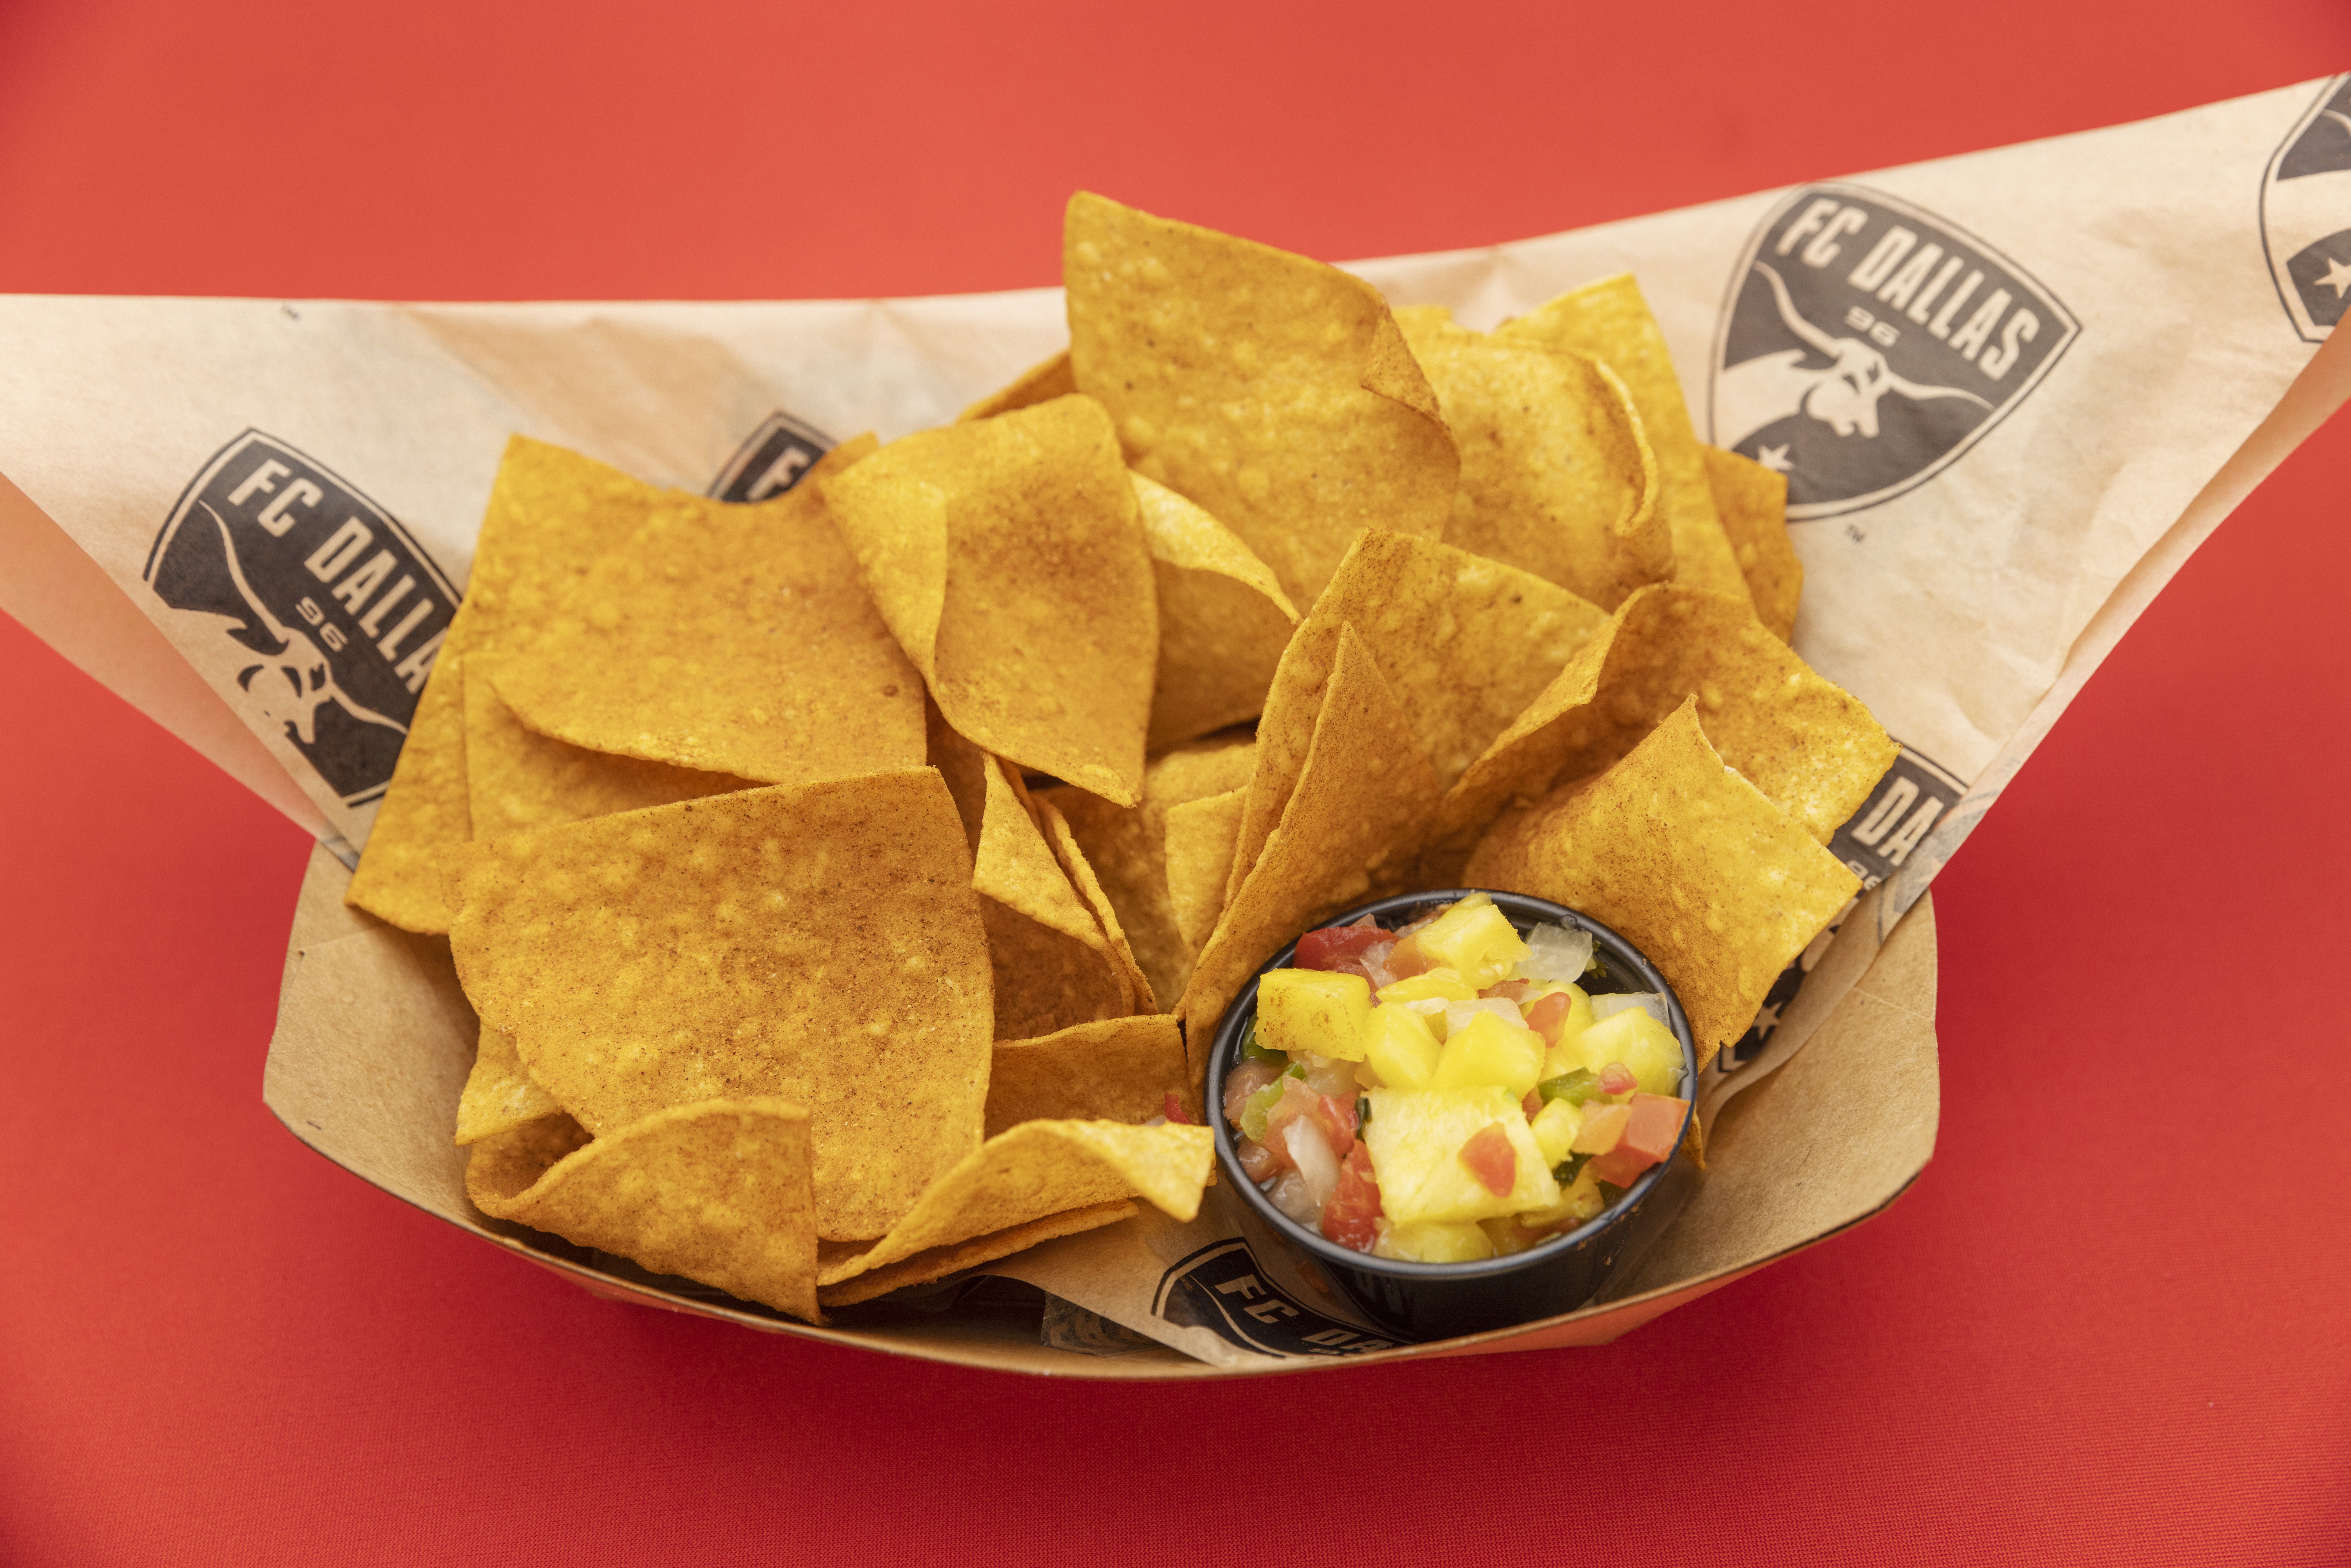 Flavored chips and pineapple salsa